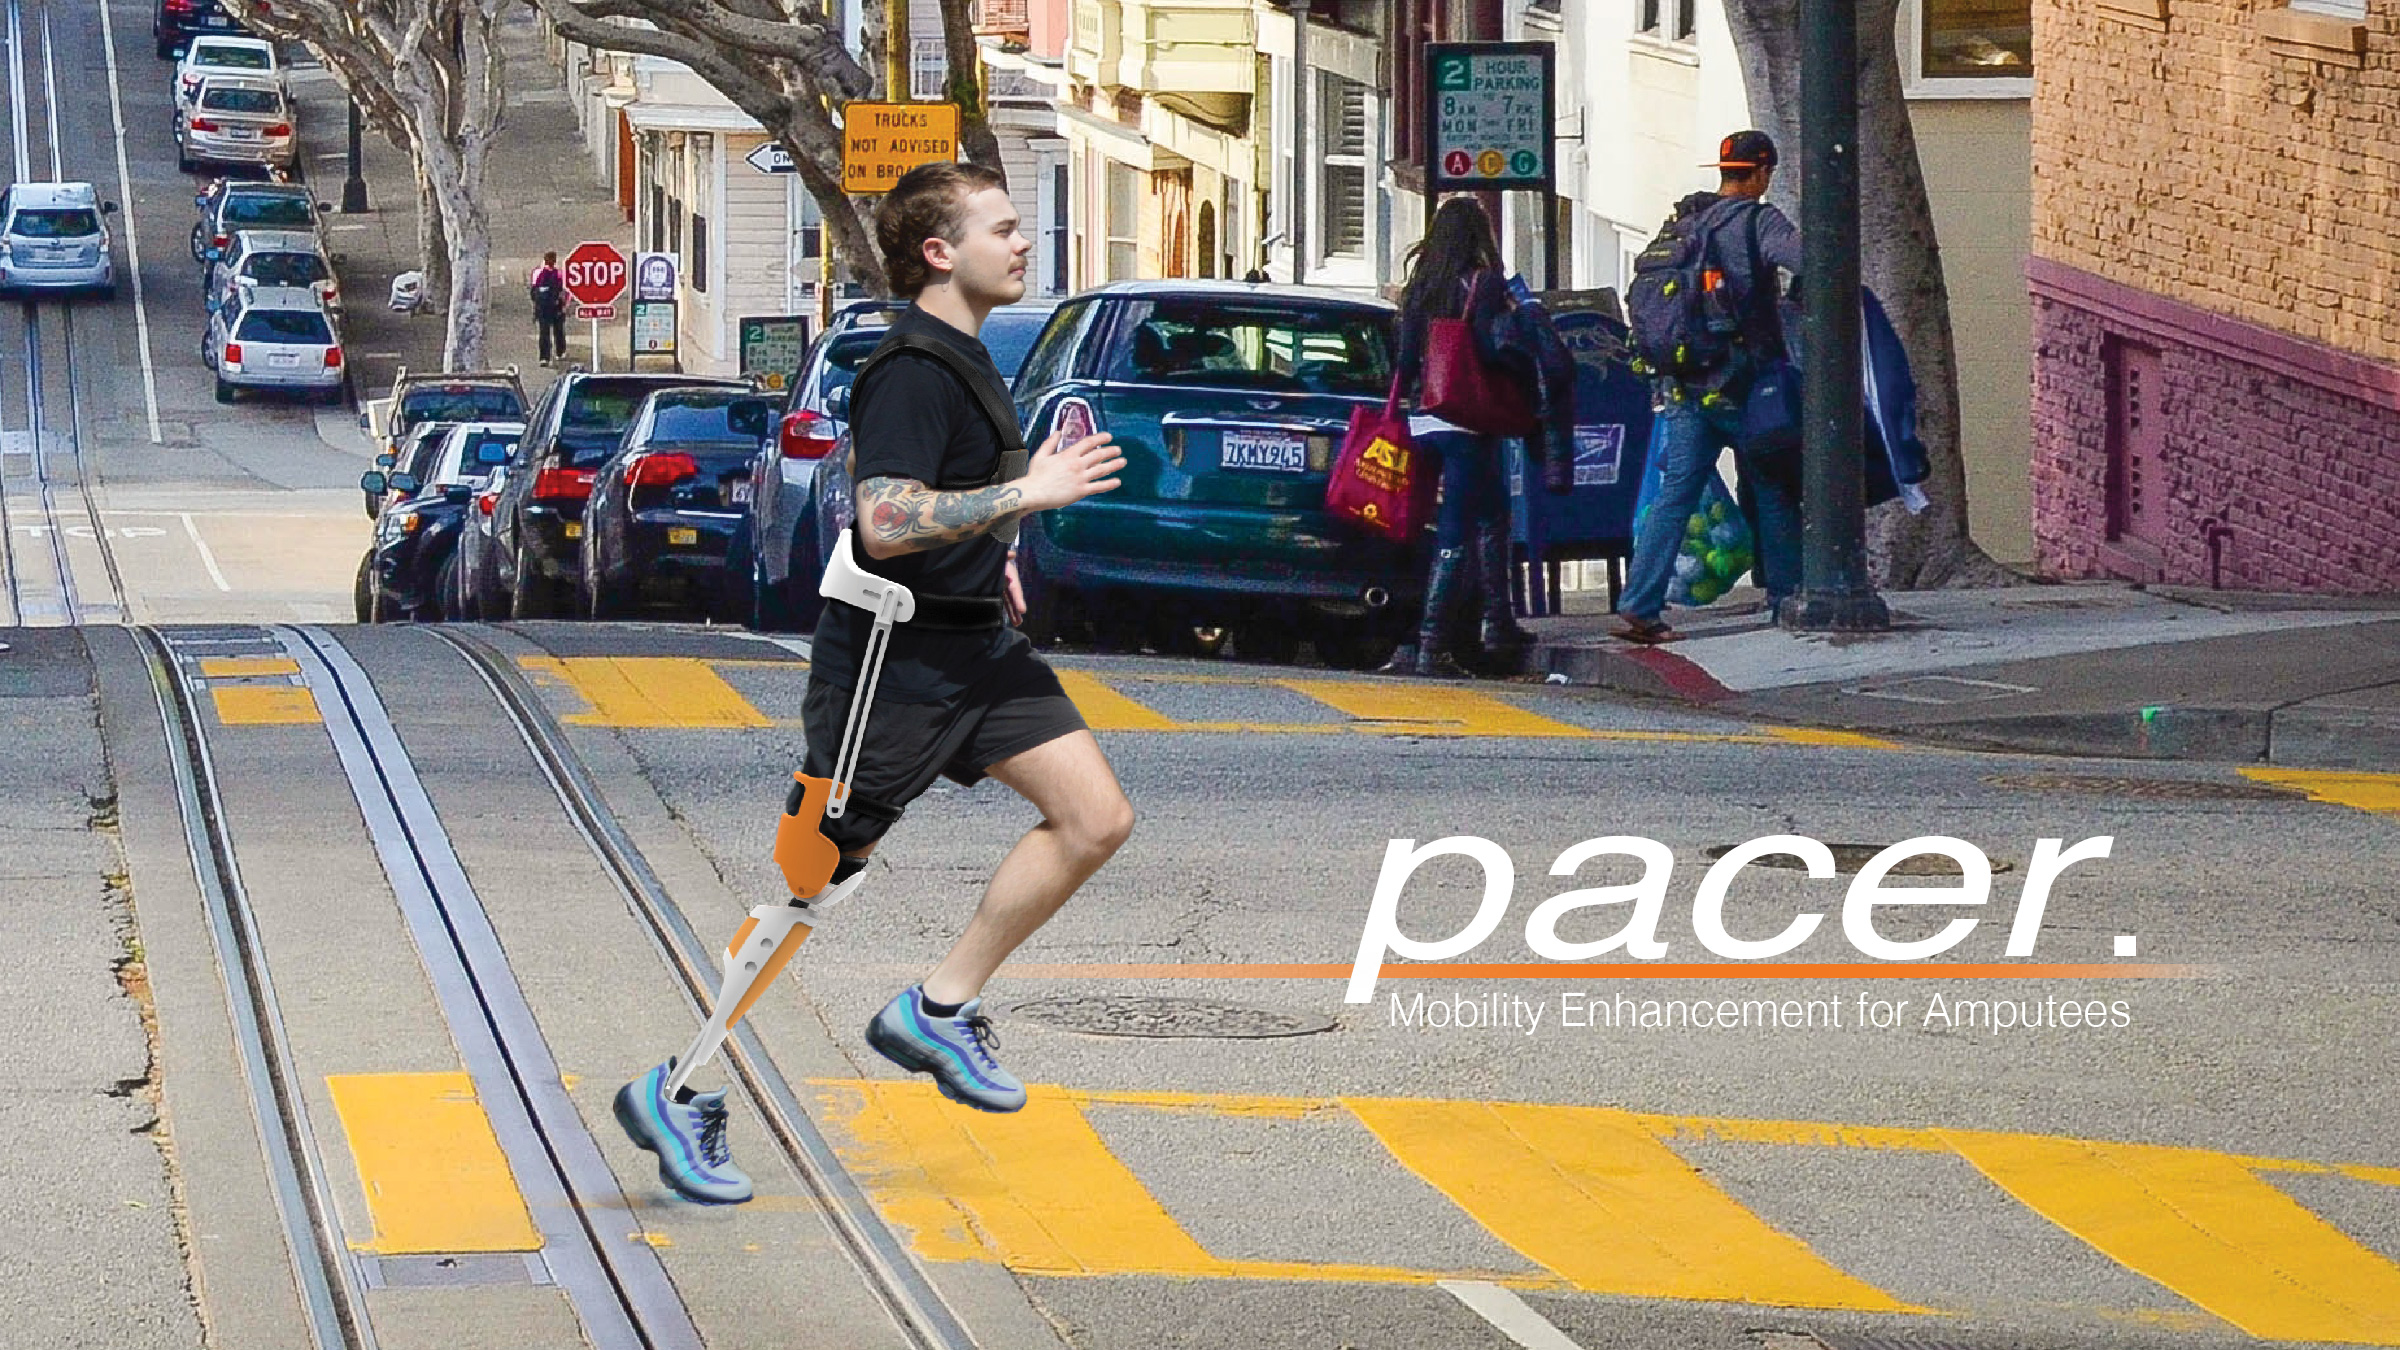 Jack Marcisz with Pacer: The Power of Mobility, Humber College